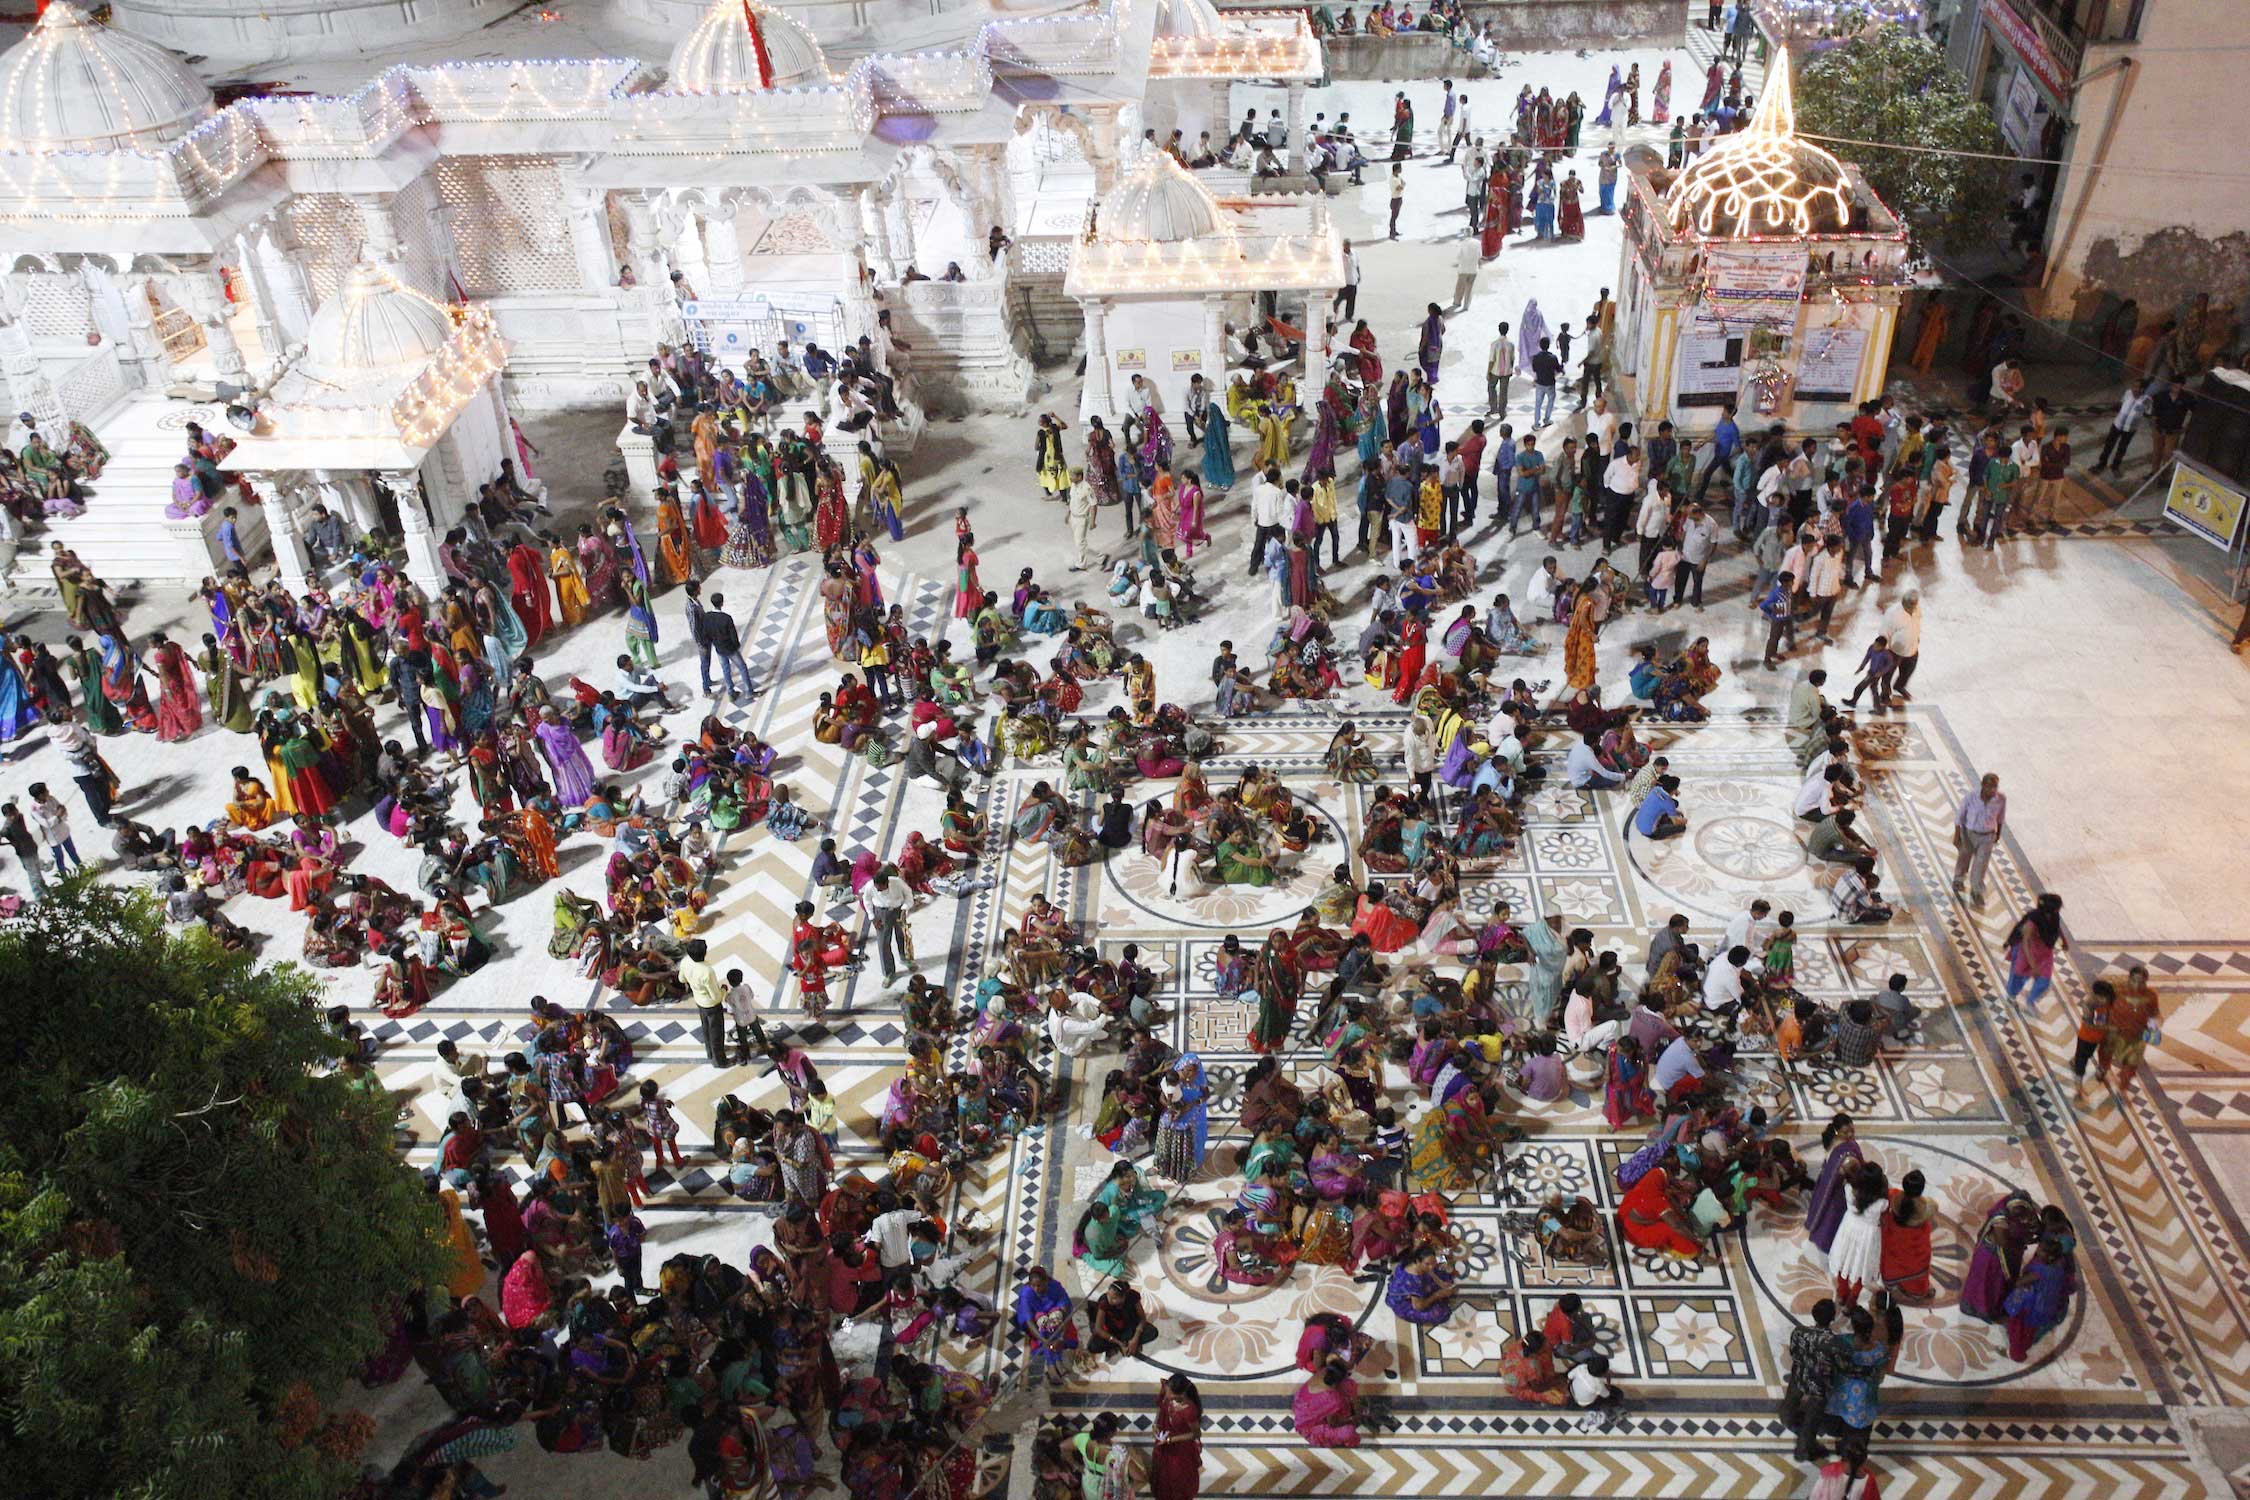 An remote temple in the North East of Gujarat on the 8th day of Navratri. After the Aarti, a huge circle was formed and everybody is dancing around the entire temple complex. In the middle are women from neighboring villages and tribal areas, farmers who visited the temple for the celebration.